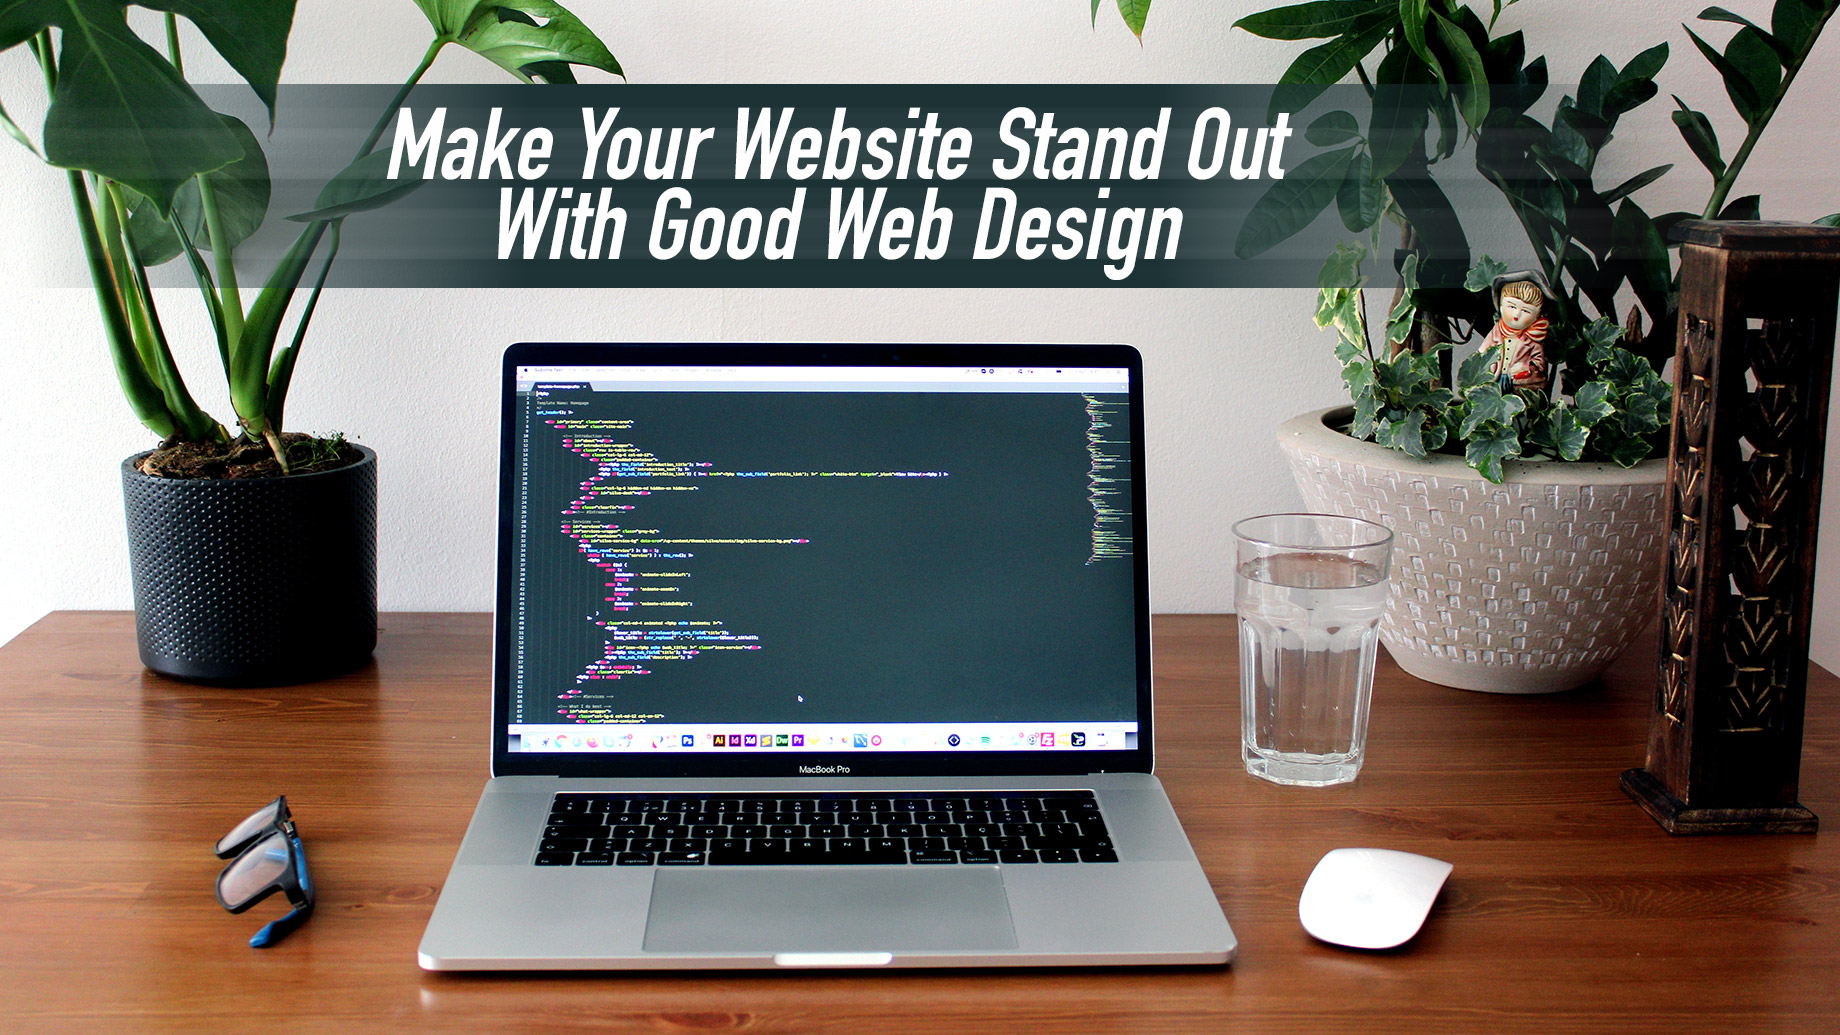 Make Your Website Stand Out With Good Web Design